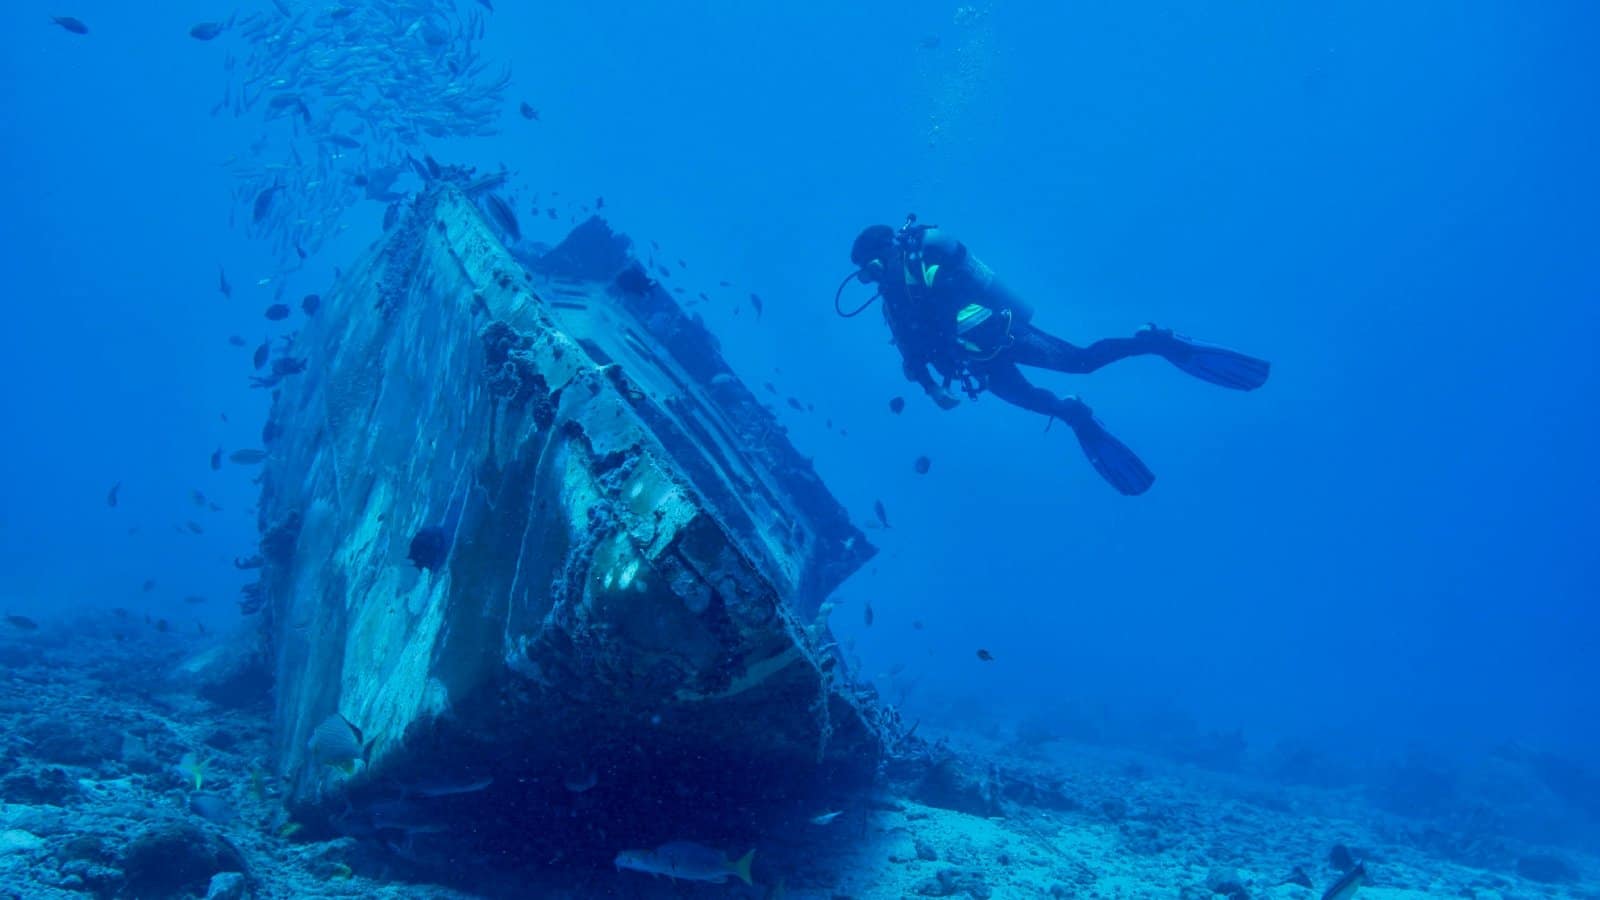 <p class="wp-caption-text">Image Credit: Pexels / Pascal Ingelrest</p>  <p><span>Wreck diving offers a fascinating glimpse into history, and the SS Thistlegorm in the Red Sea is one of the most iconic wreck dives. Sunk during World War II, this British merchant navy ship is now a thriving artificial reef, home to a diverse range of marine life.</span></p> <p><b>Insider’s Tip:</b><span> Advanced certification is essential due to the depth and potential currents. Bring a flashlight to explore the interior compartments and cargo holds.</span></p>